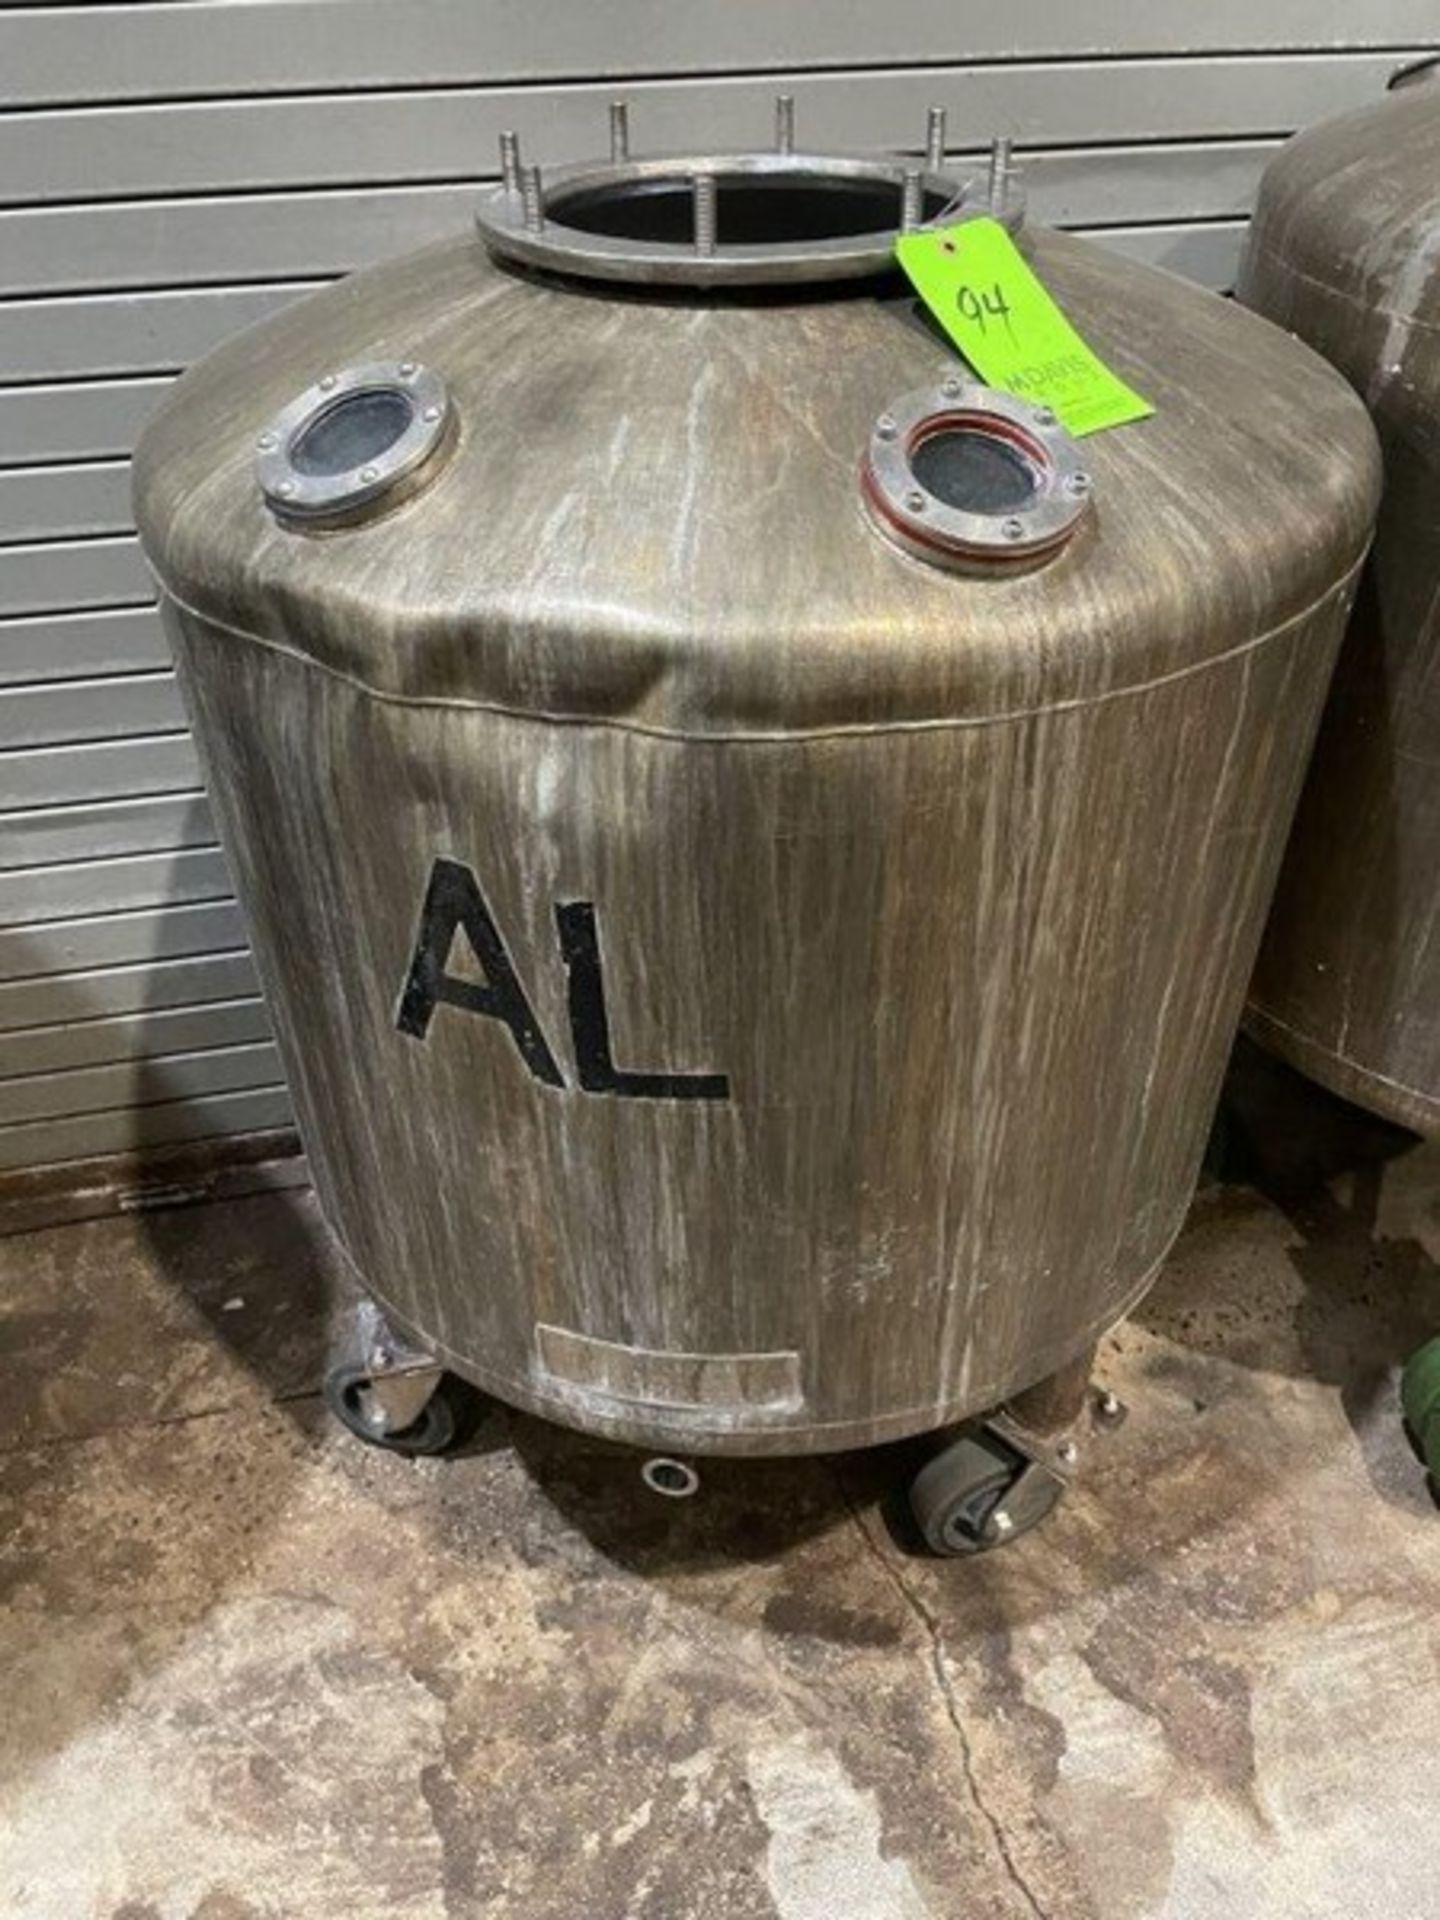 Grundy 5 Gal. S/S Jacketed Vessel, Test Pressure 45 PSI (LOCATED IN FREDERICK, MD) - Image 2 of 4